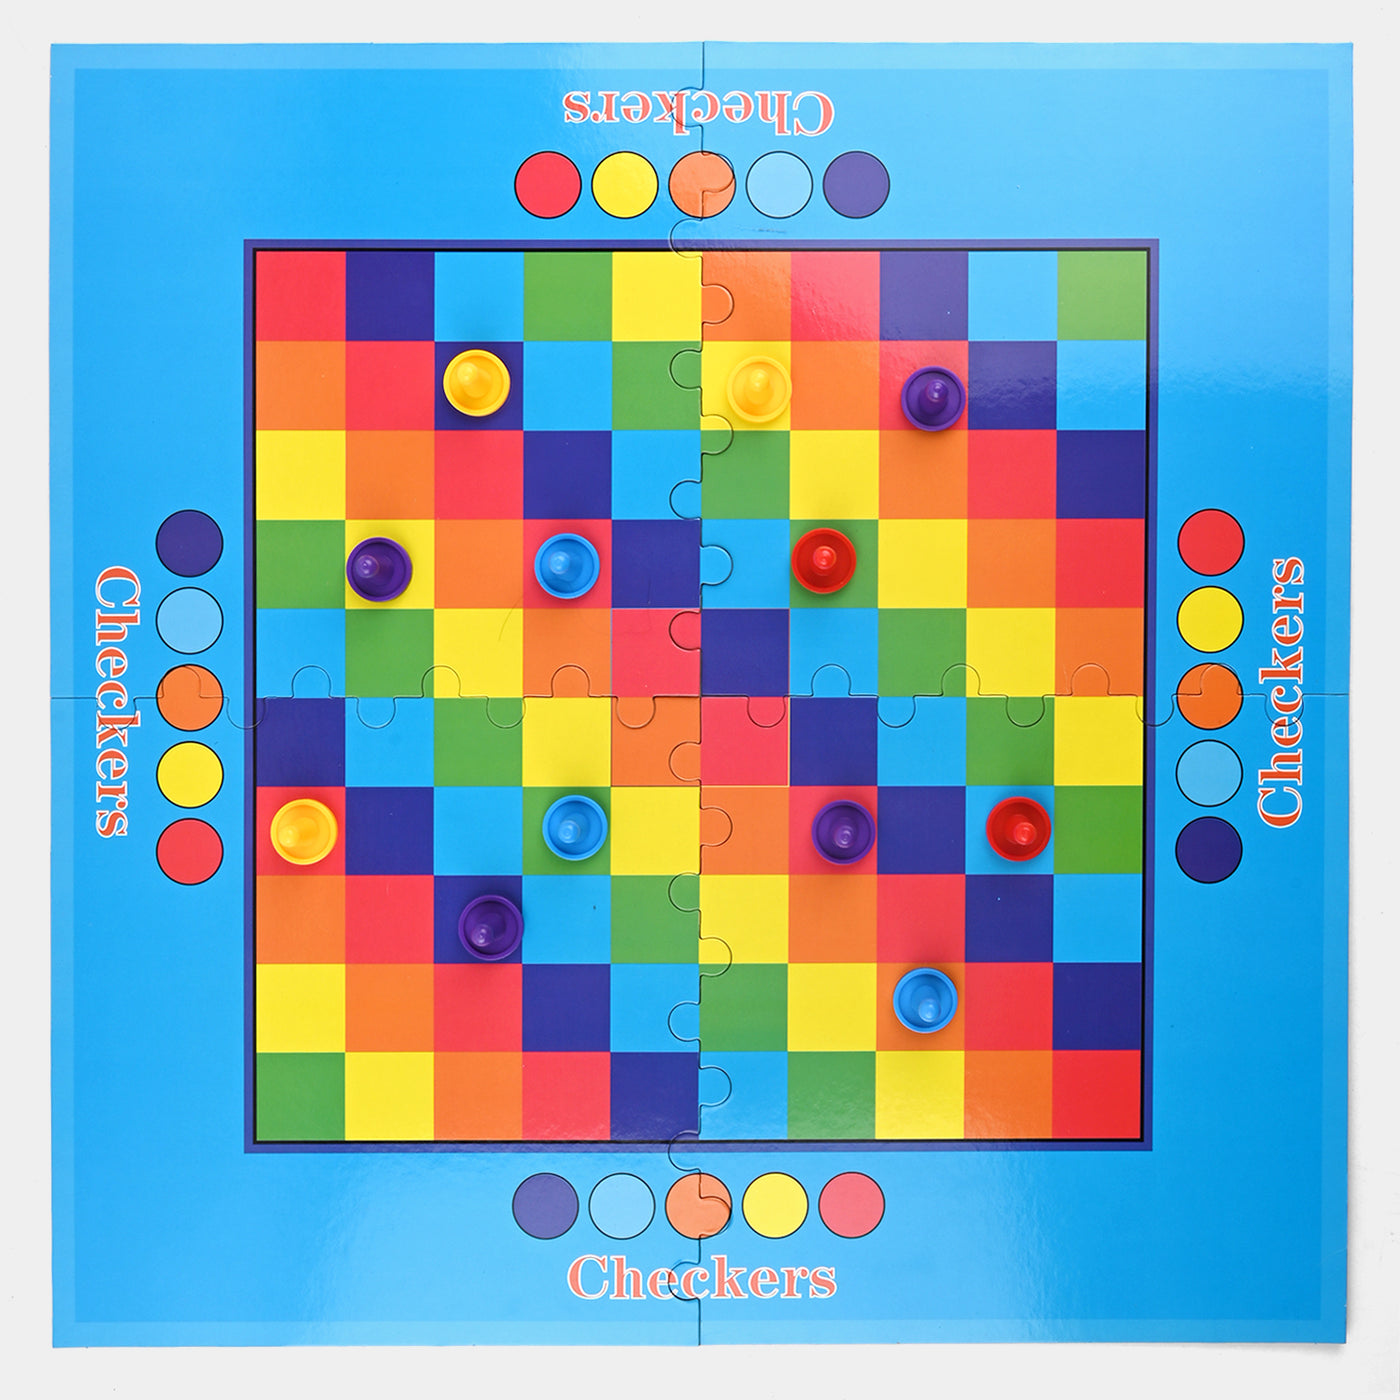 Puzzle Checkers Board Game For Kids